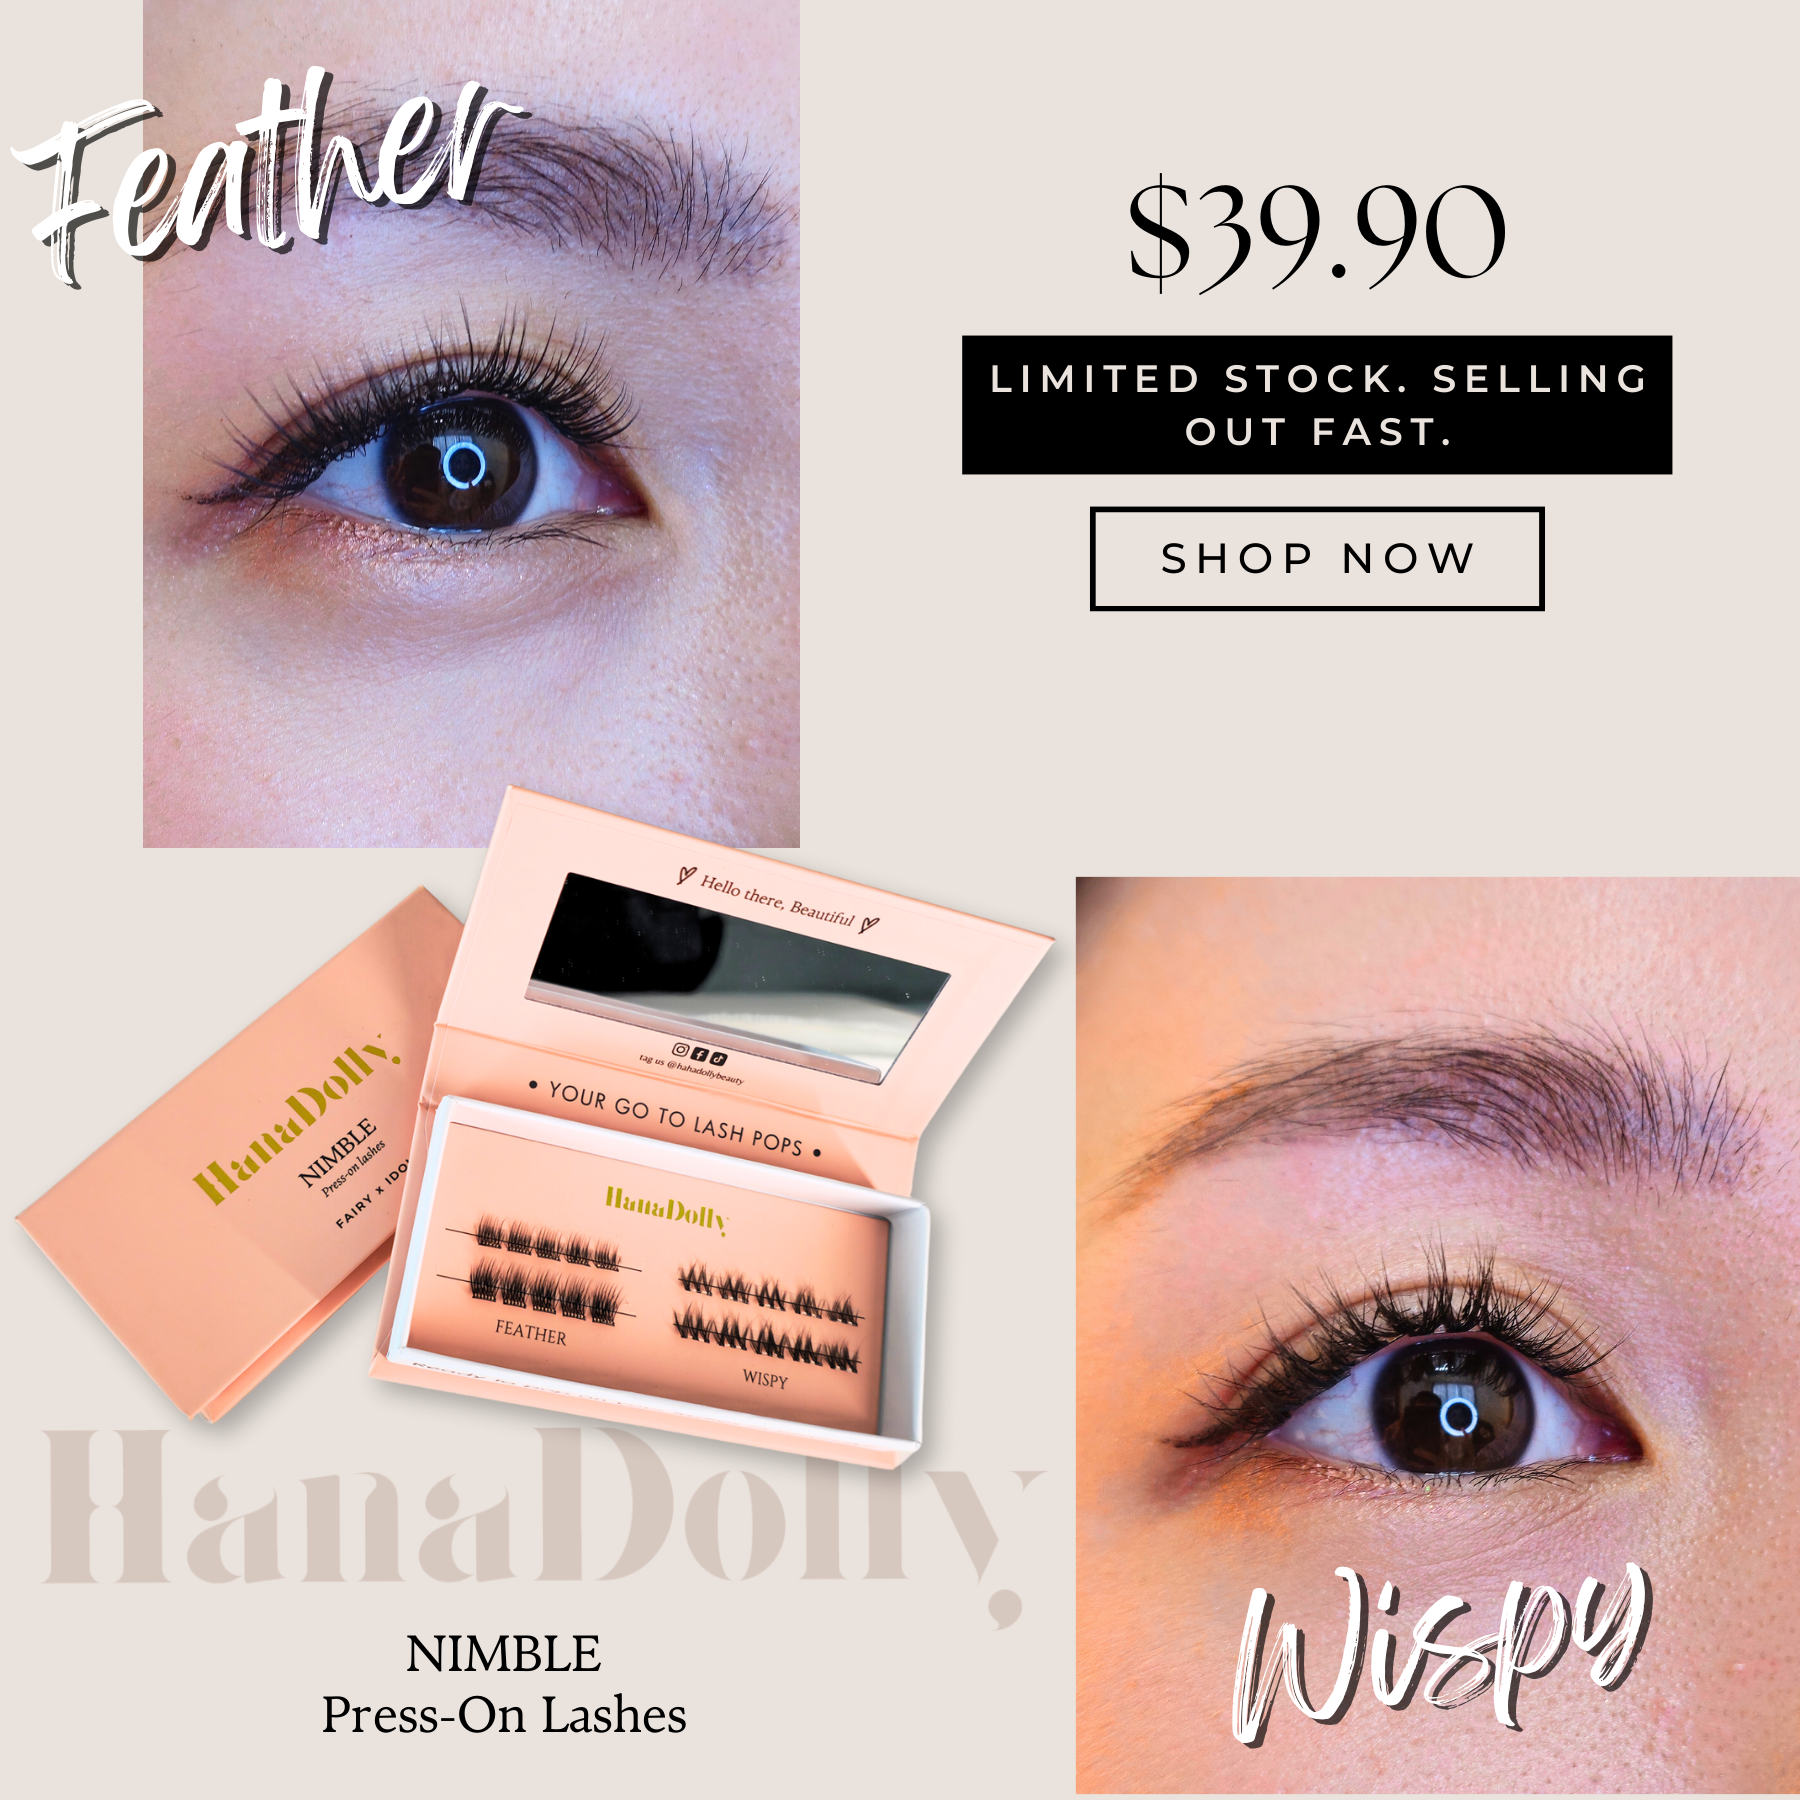 NIMBLE Press-On Lashes - Feather x Wispy - Natural Lash Pack | HanaDolly DIY Lashes